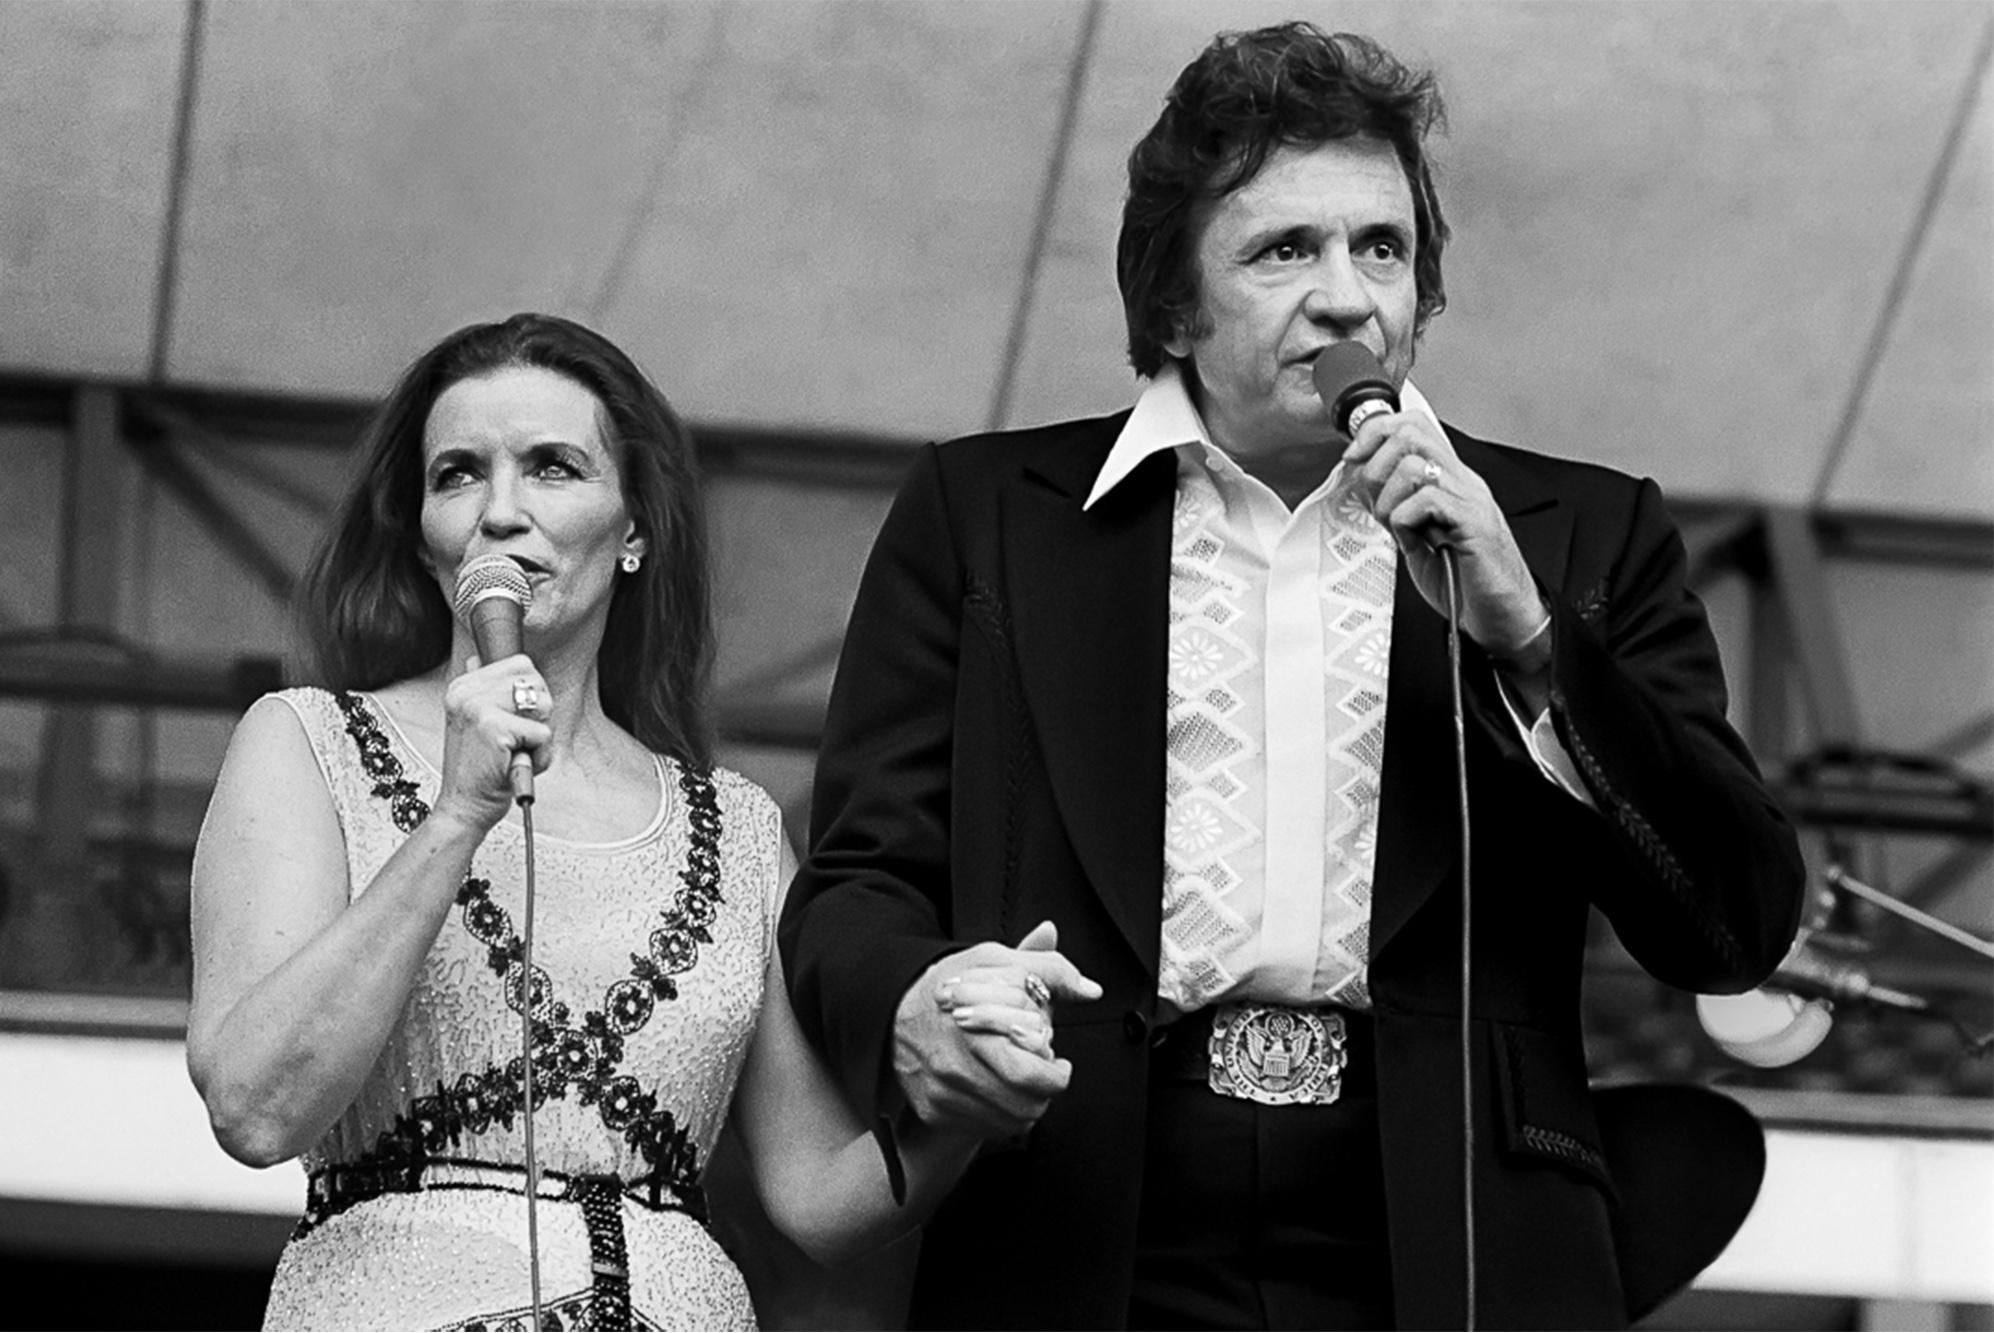 June Carter and Johnny Cash by Lynn Goldsmith